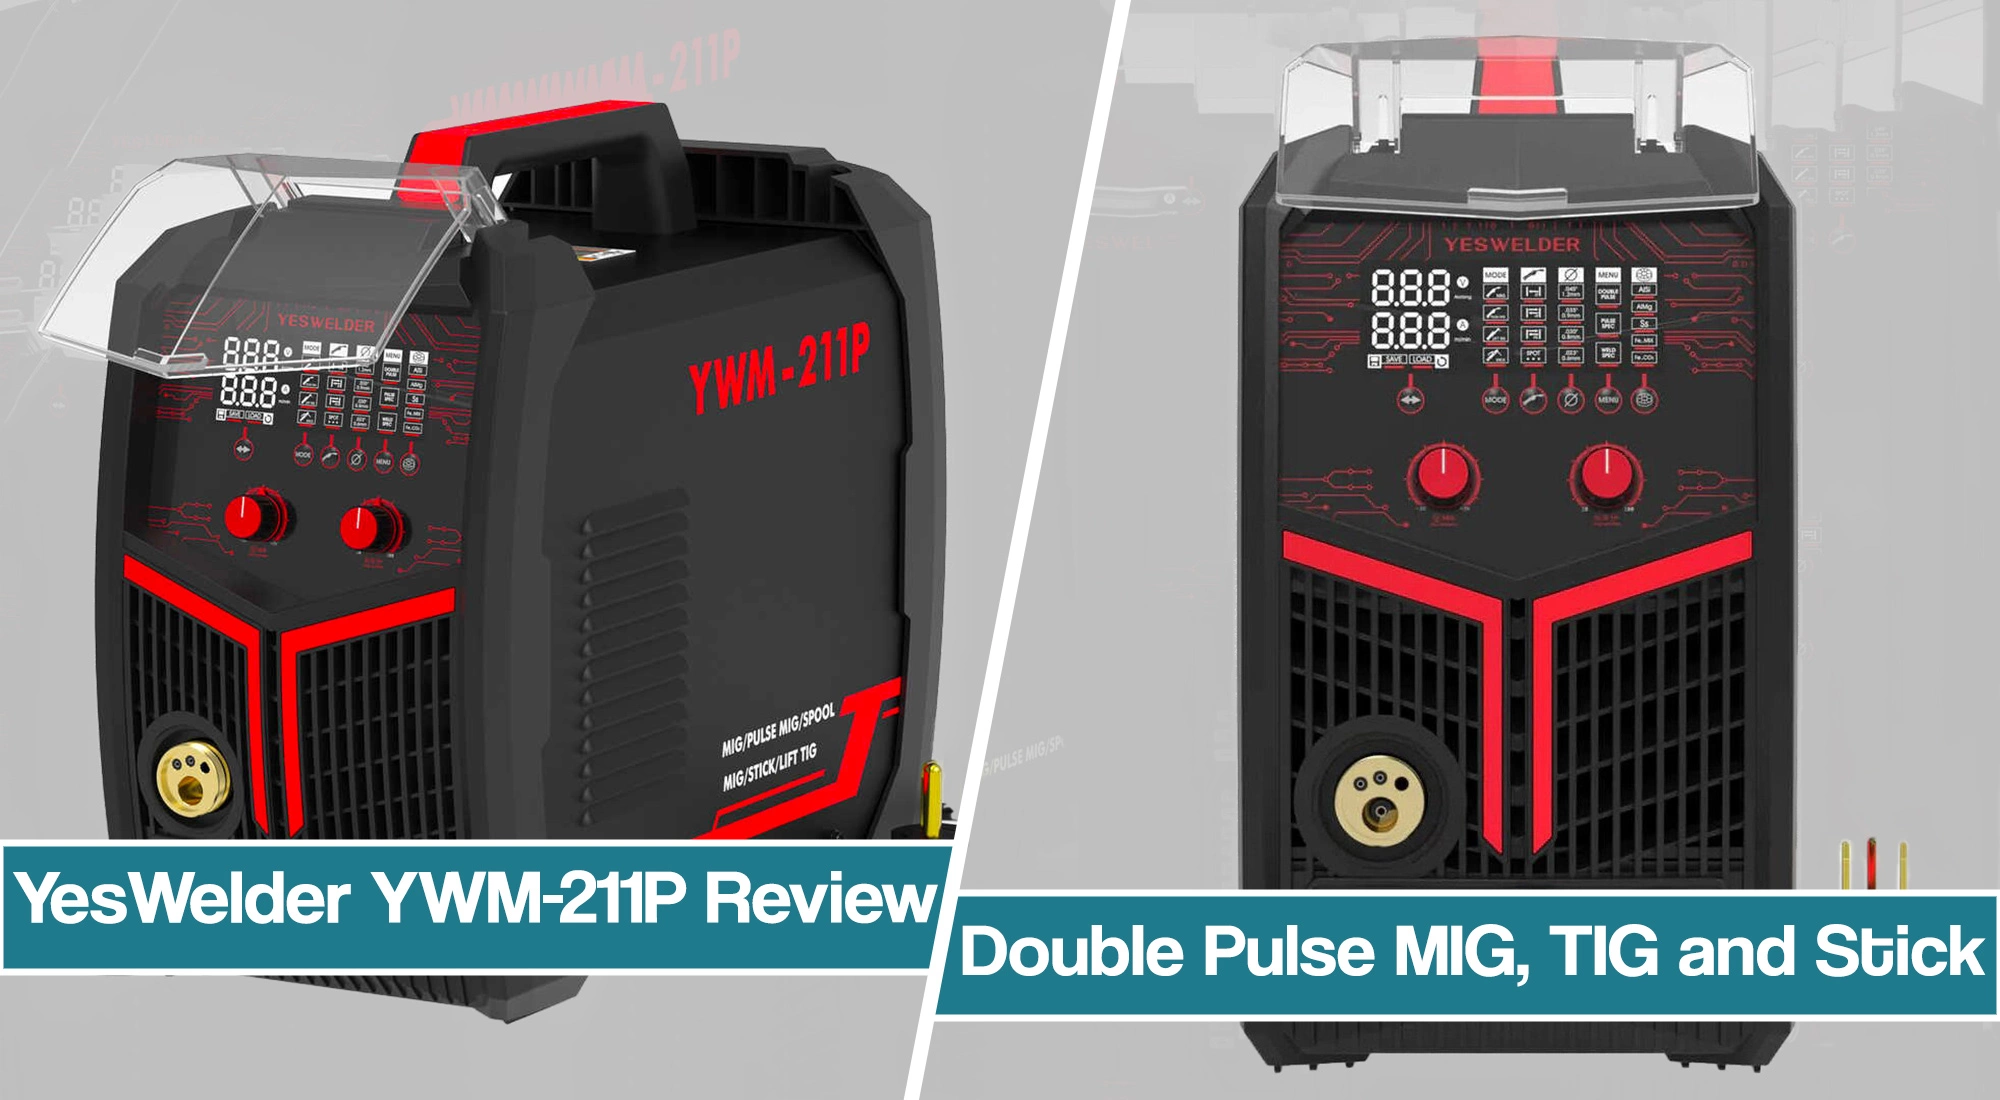 YesWelder YWM-211P Review – Budget MIG Welder With Double Pulse